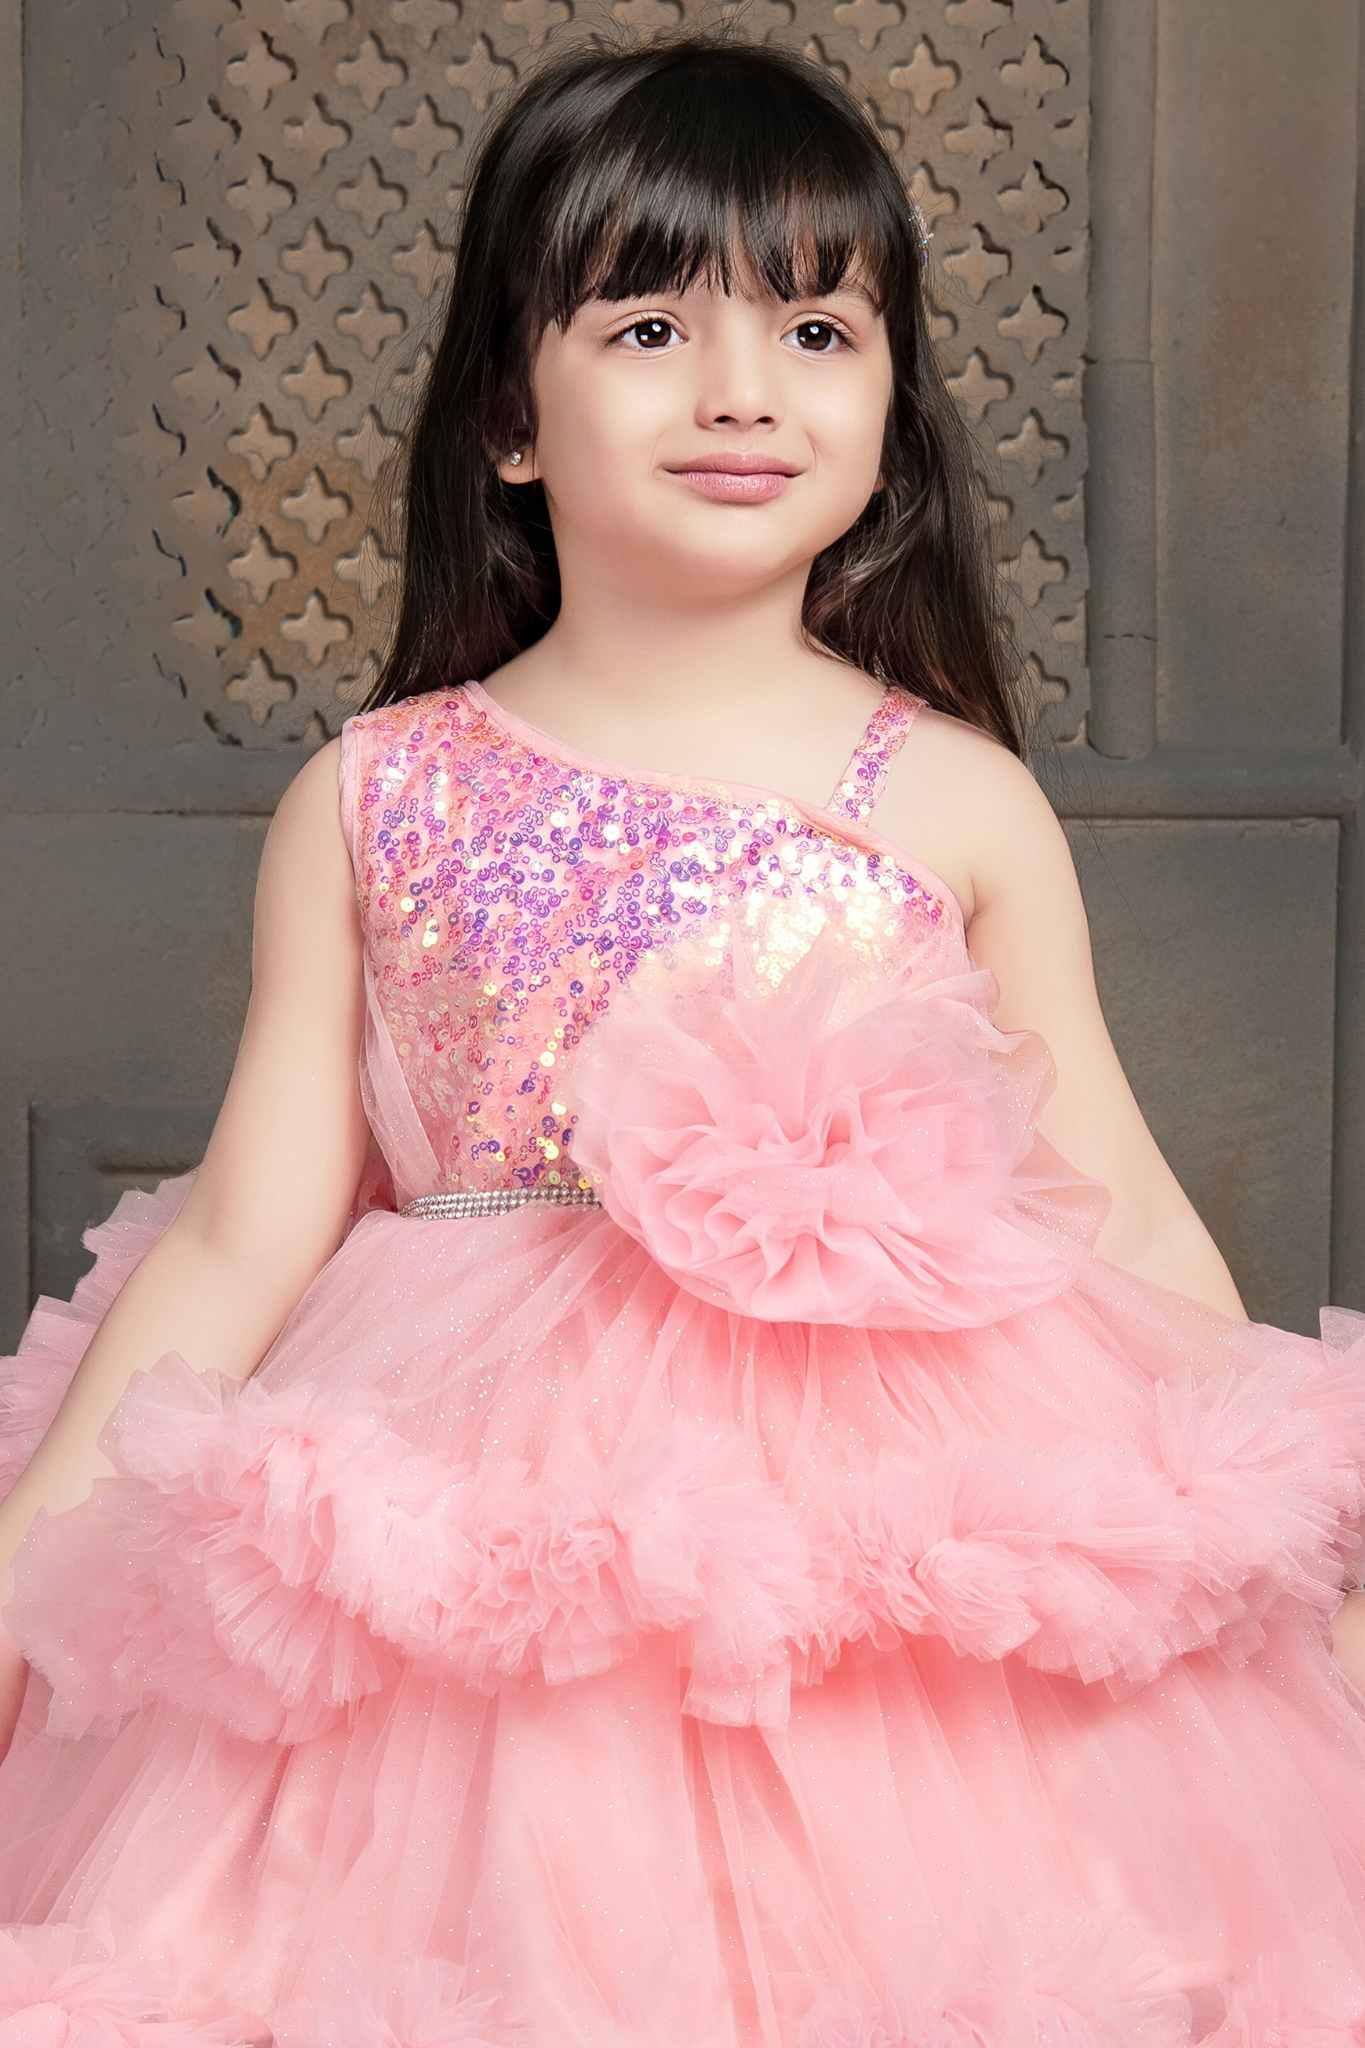 Deep violet layered frilled frock with silver bow. – Lagorii Kids